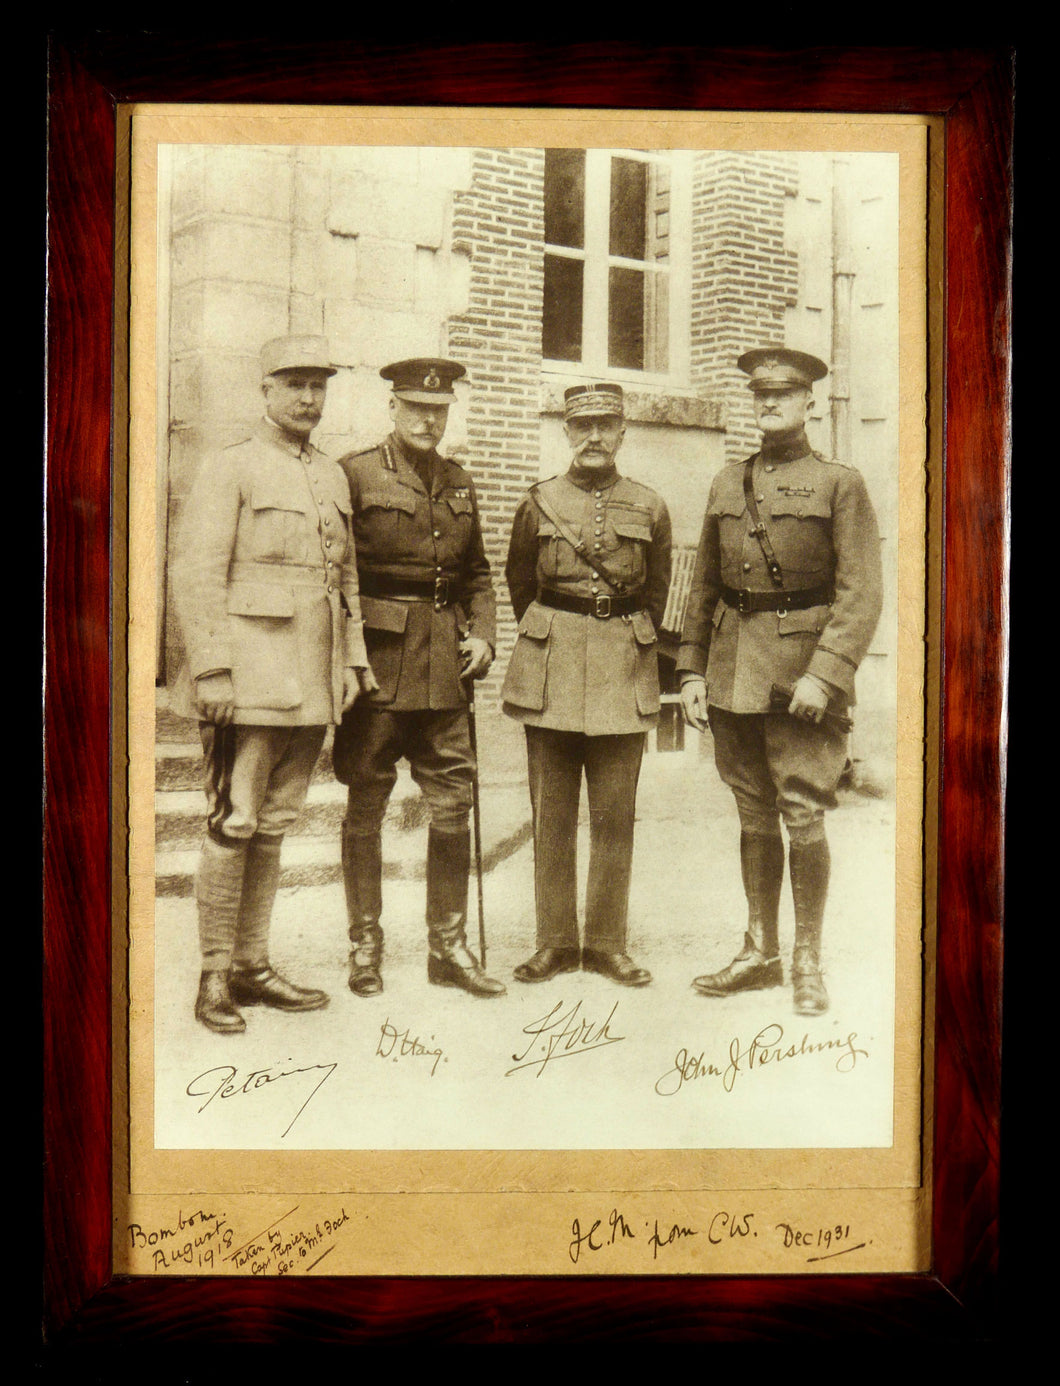 A Signed Photograph of the First World War Allied Commanders, 1918